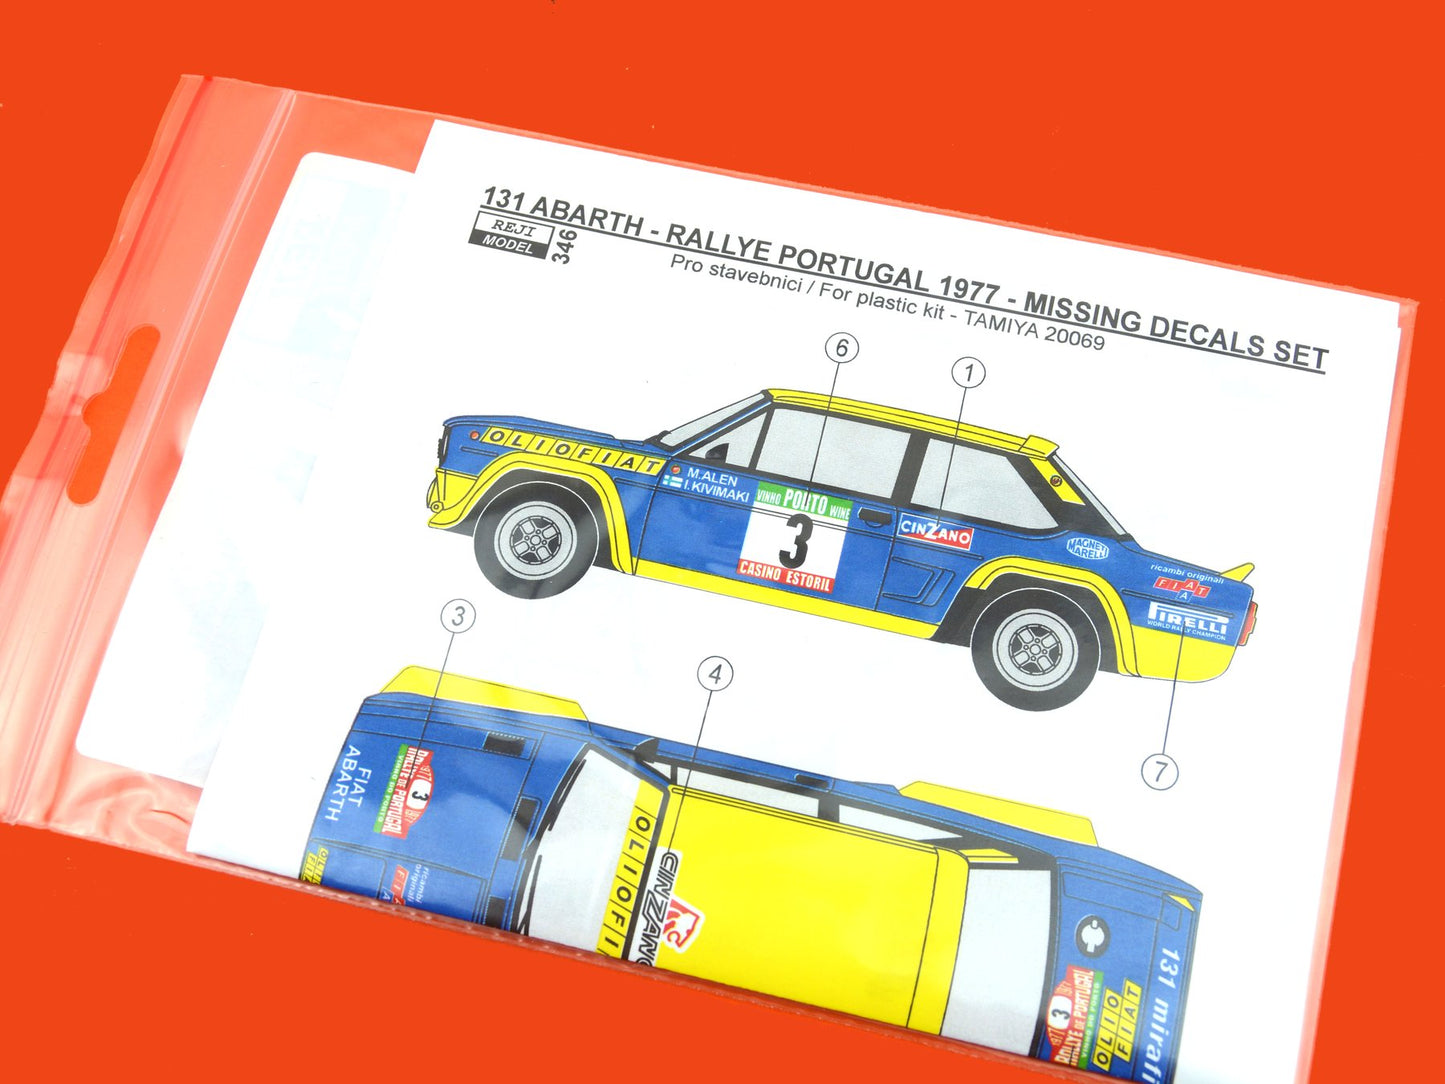 DECALS FIAT 131 ABARTH - RALLY PORTUGAL 1977 MISSING LOGOS